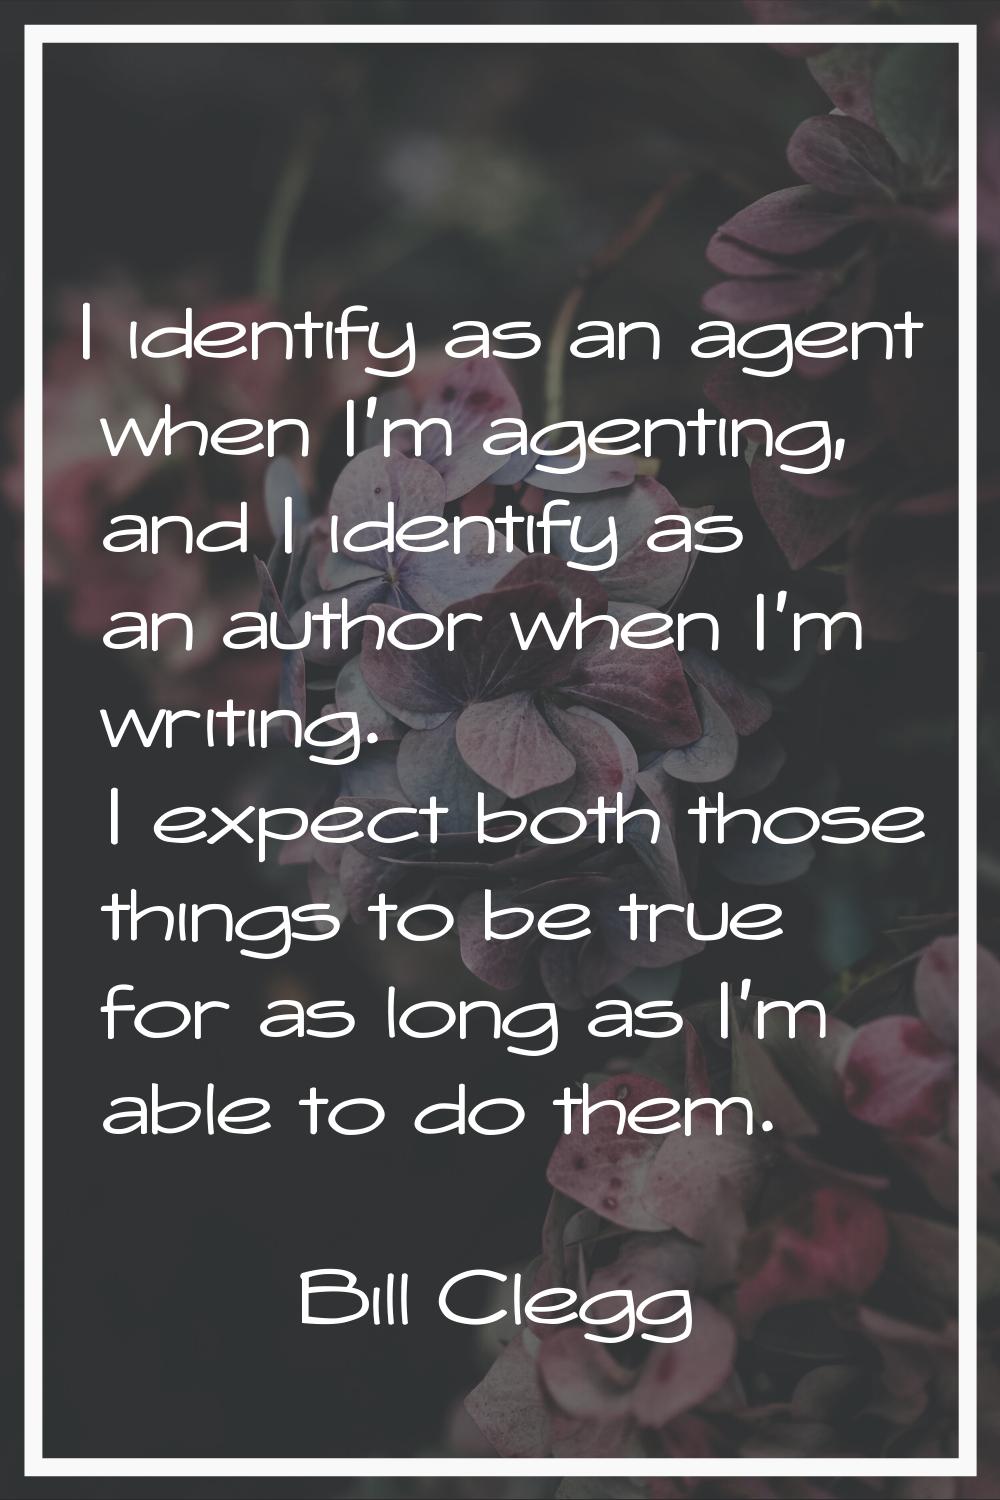 I identify as an agent when I'm agenting, and I identify as an author when I'm writing. I expect bo